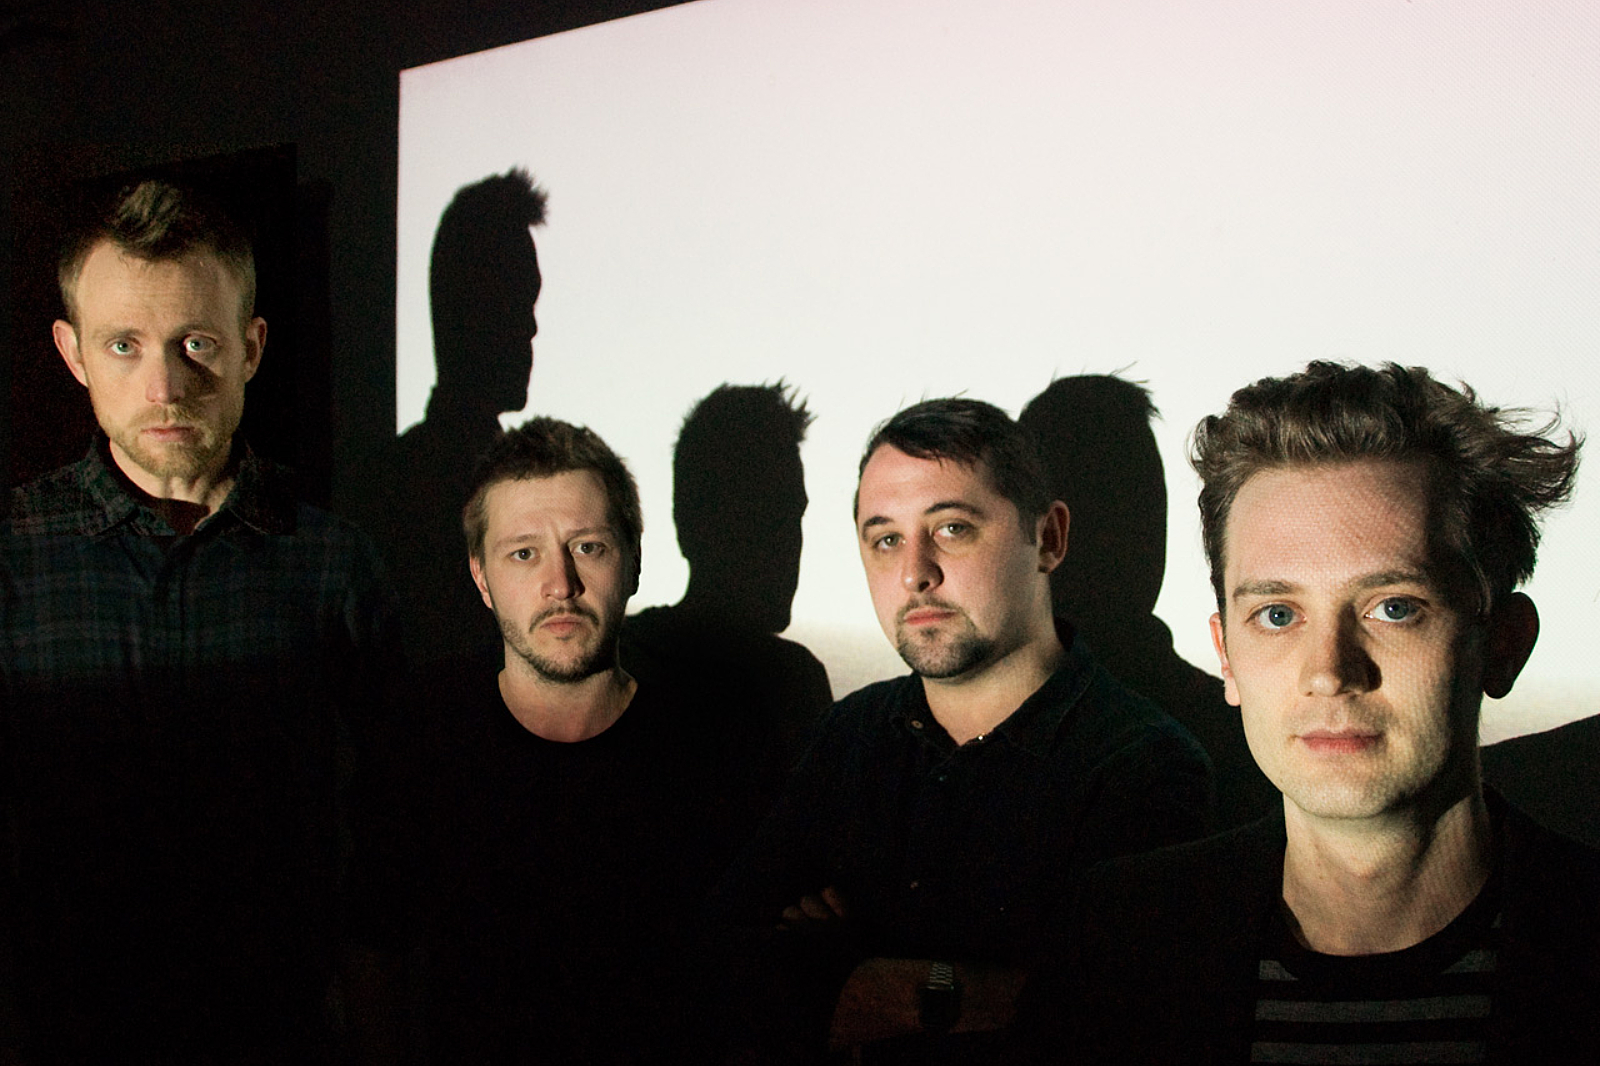 65daysofstatic, on how they created an infinite soundtrack